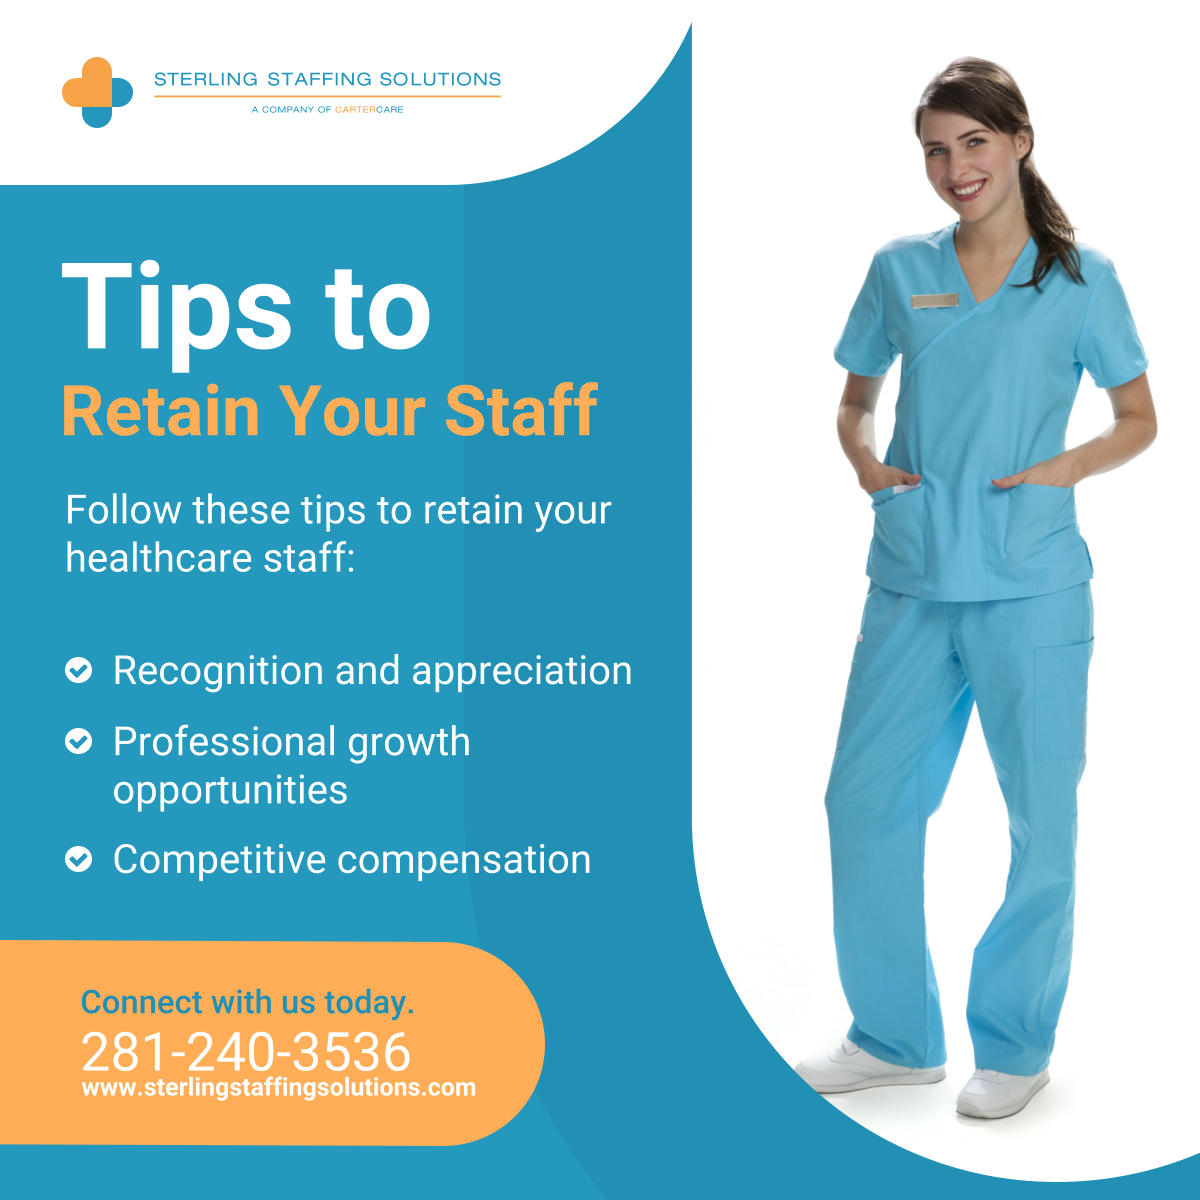 Should you need help retaining your healthcare staff, we’re here to help. Visit our website to learn how.

#HealthcareStaff #SugarLandTX #HealthCareStaffing